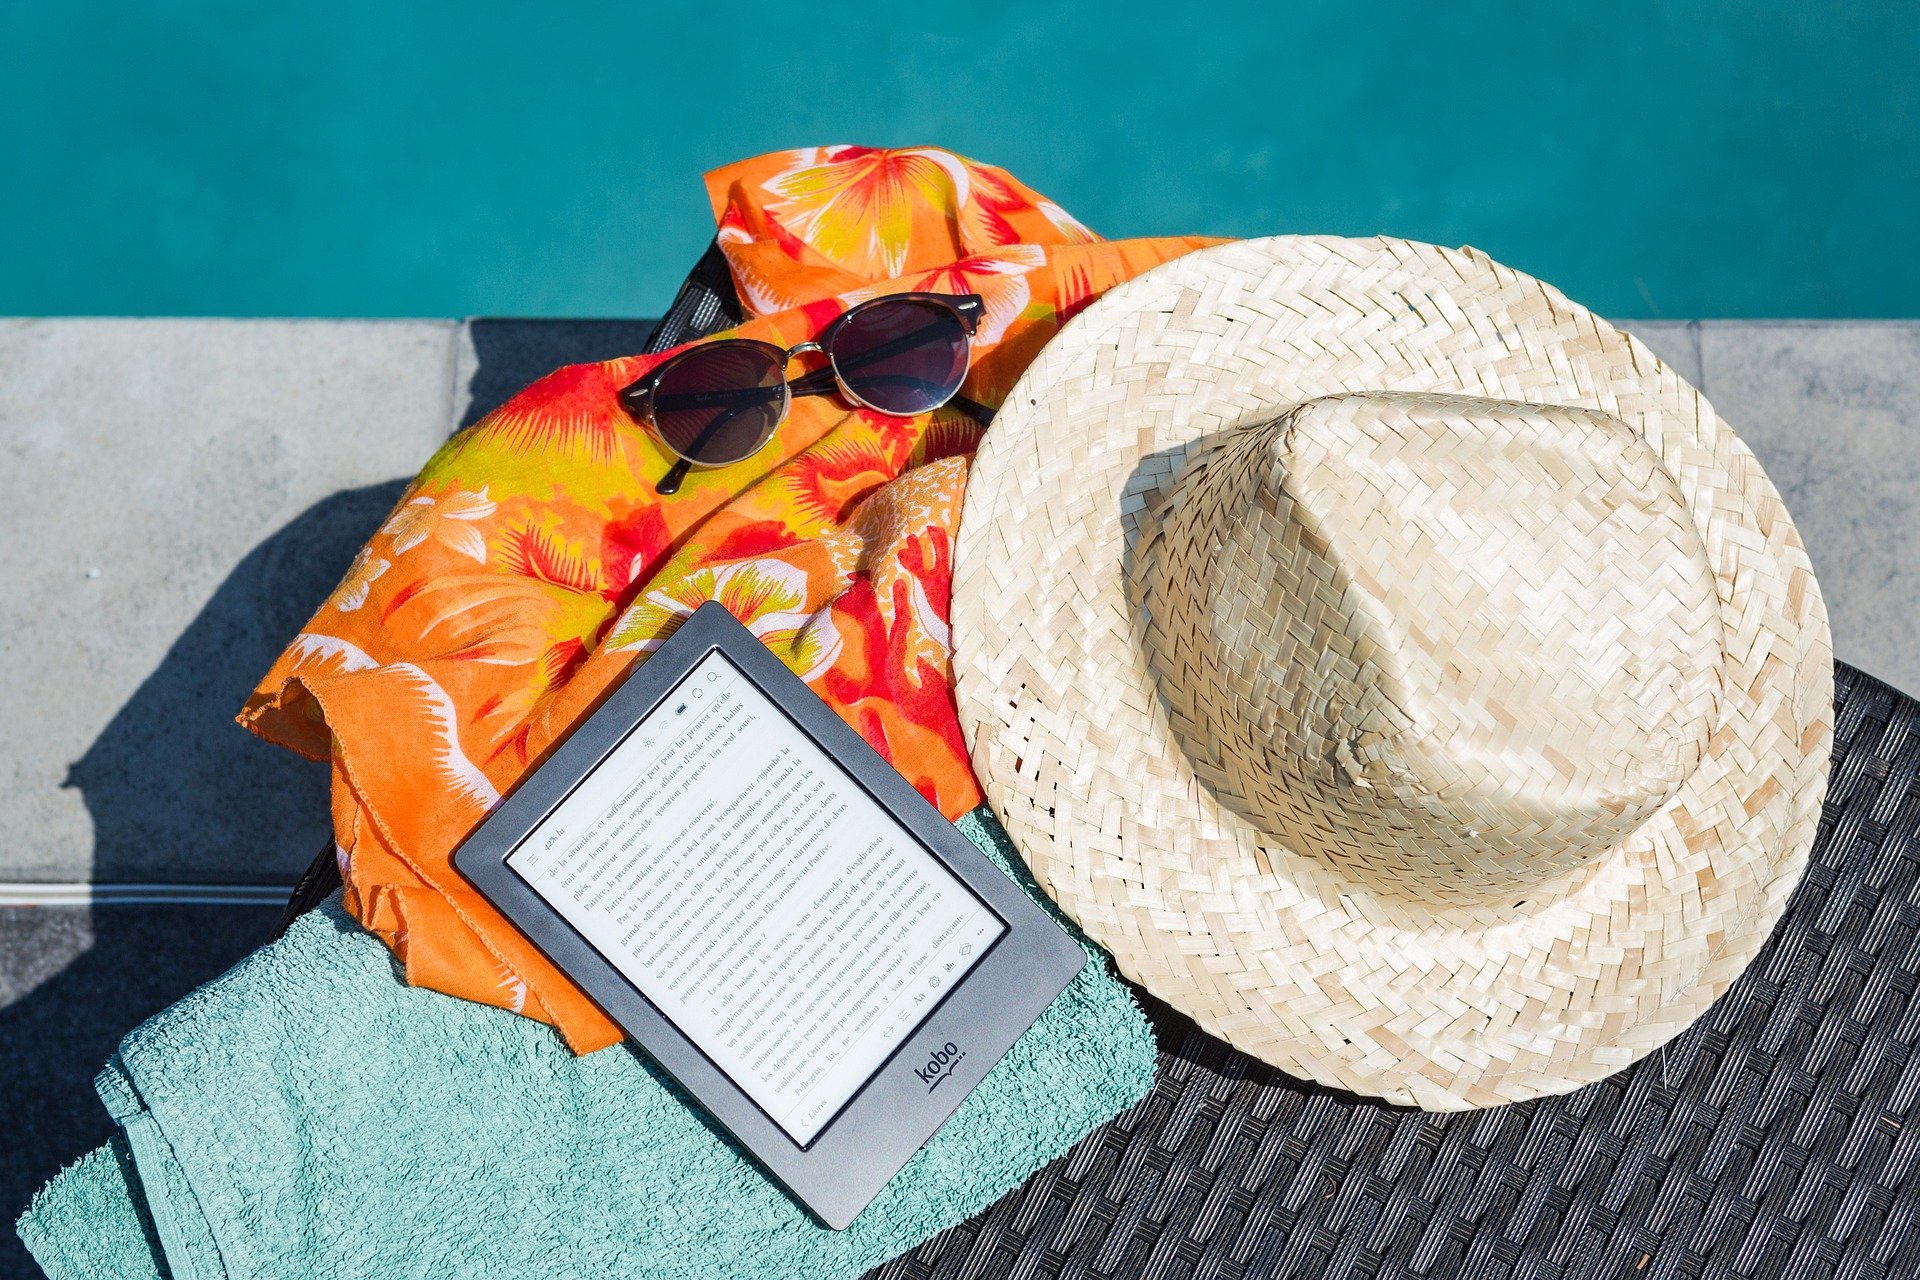 Kobo ereader, straw hat, orange swim cover up, blue towel, and sunglasses artfully laid by a pool's edge